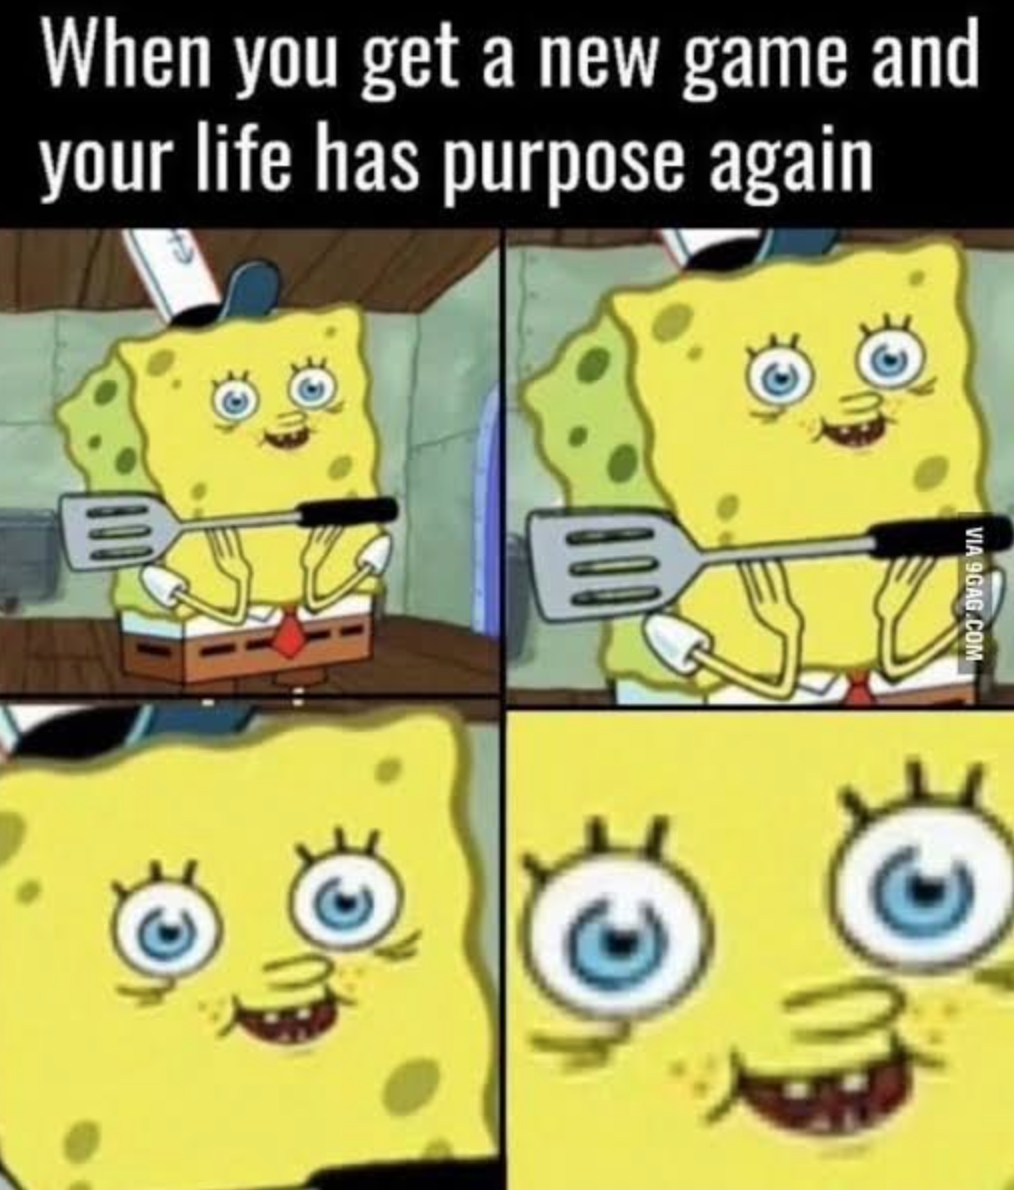 funny gaming memes - new game memes - When you get a new game and your life has purpose again Via Cag.Com